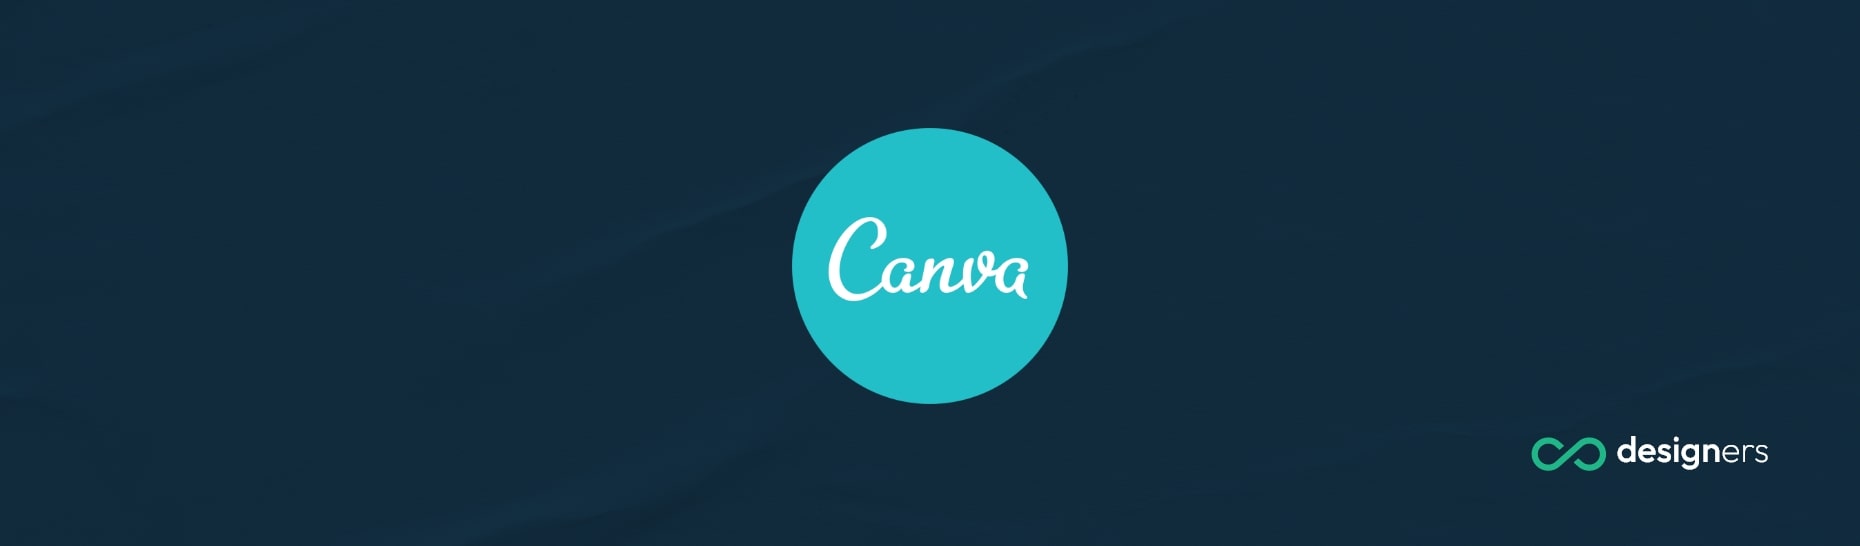 Does Canva Have Designers?